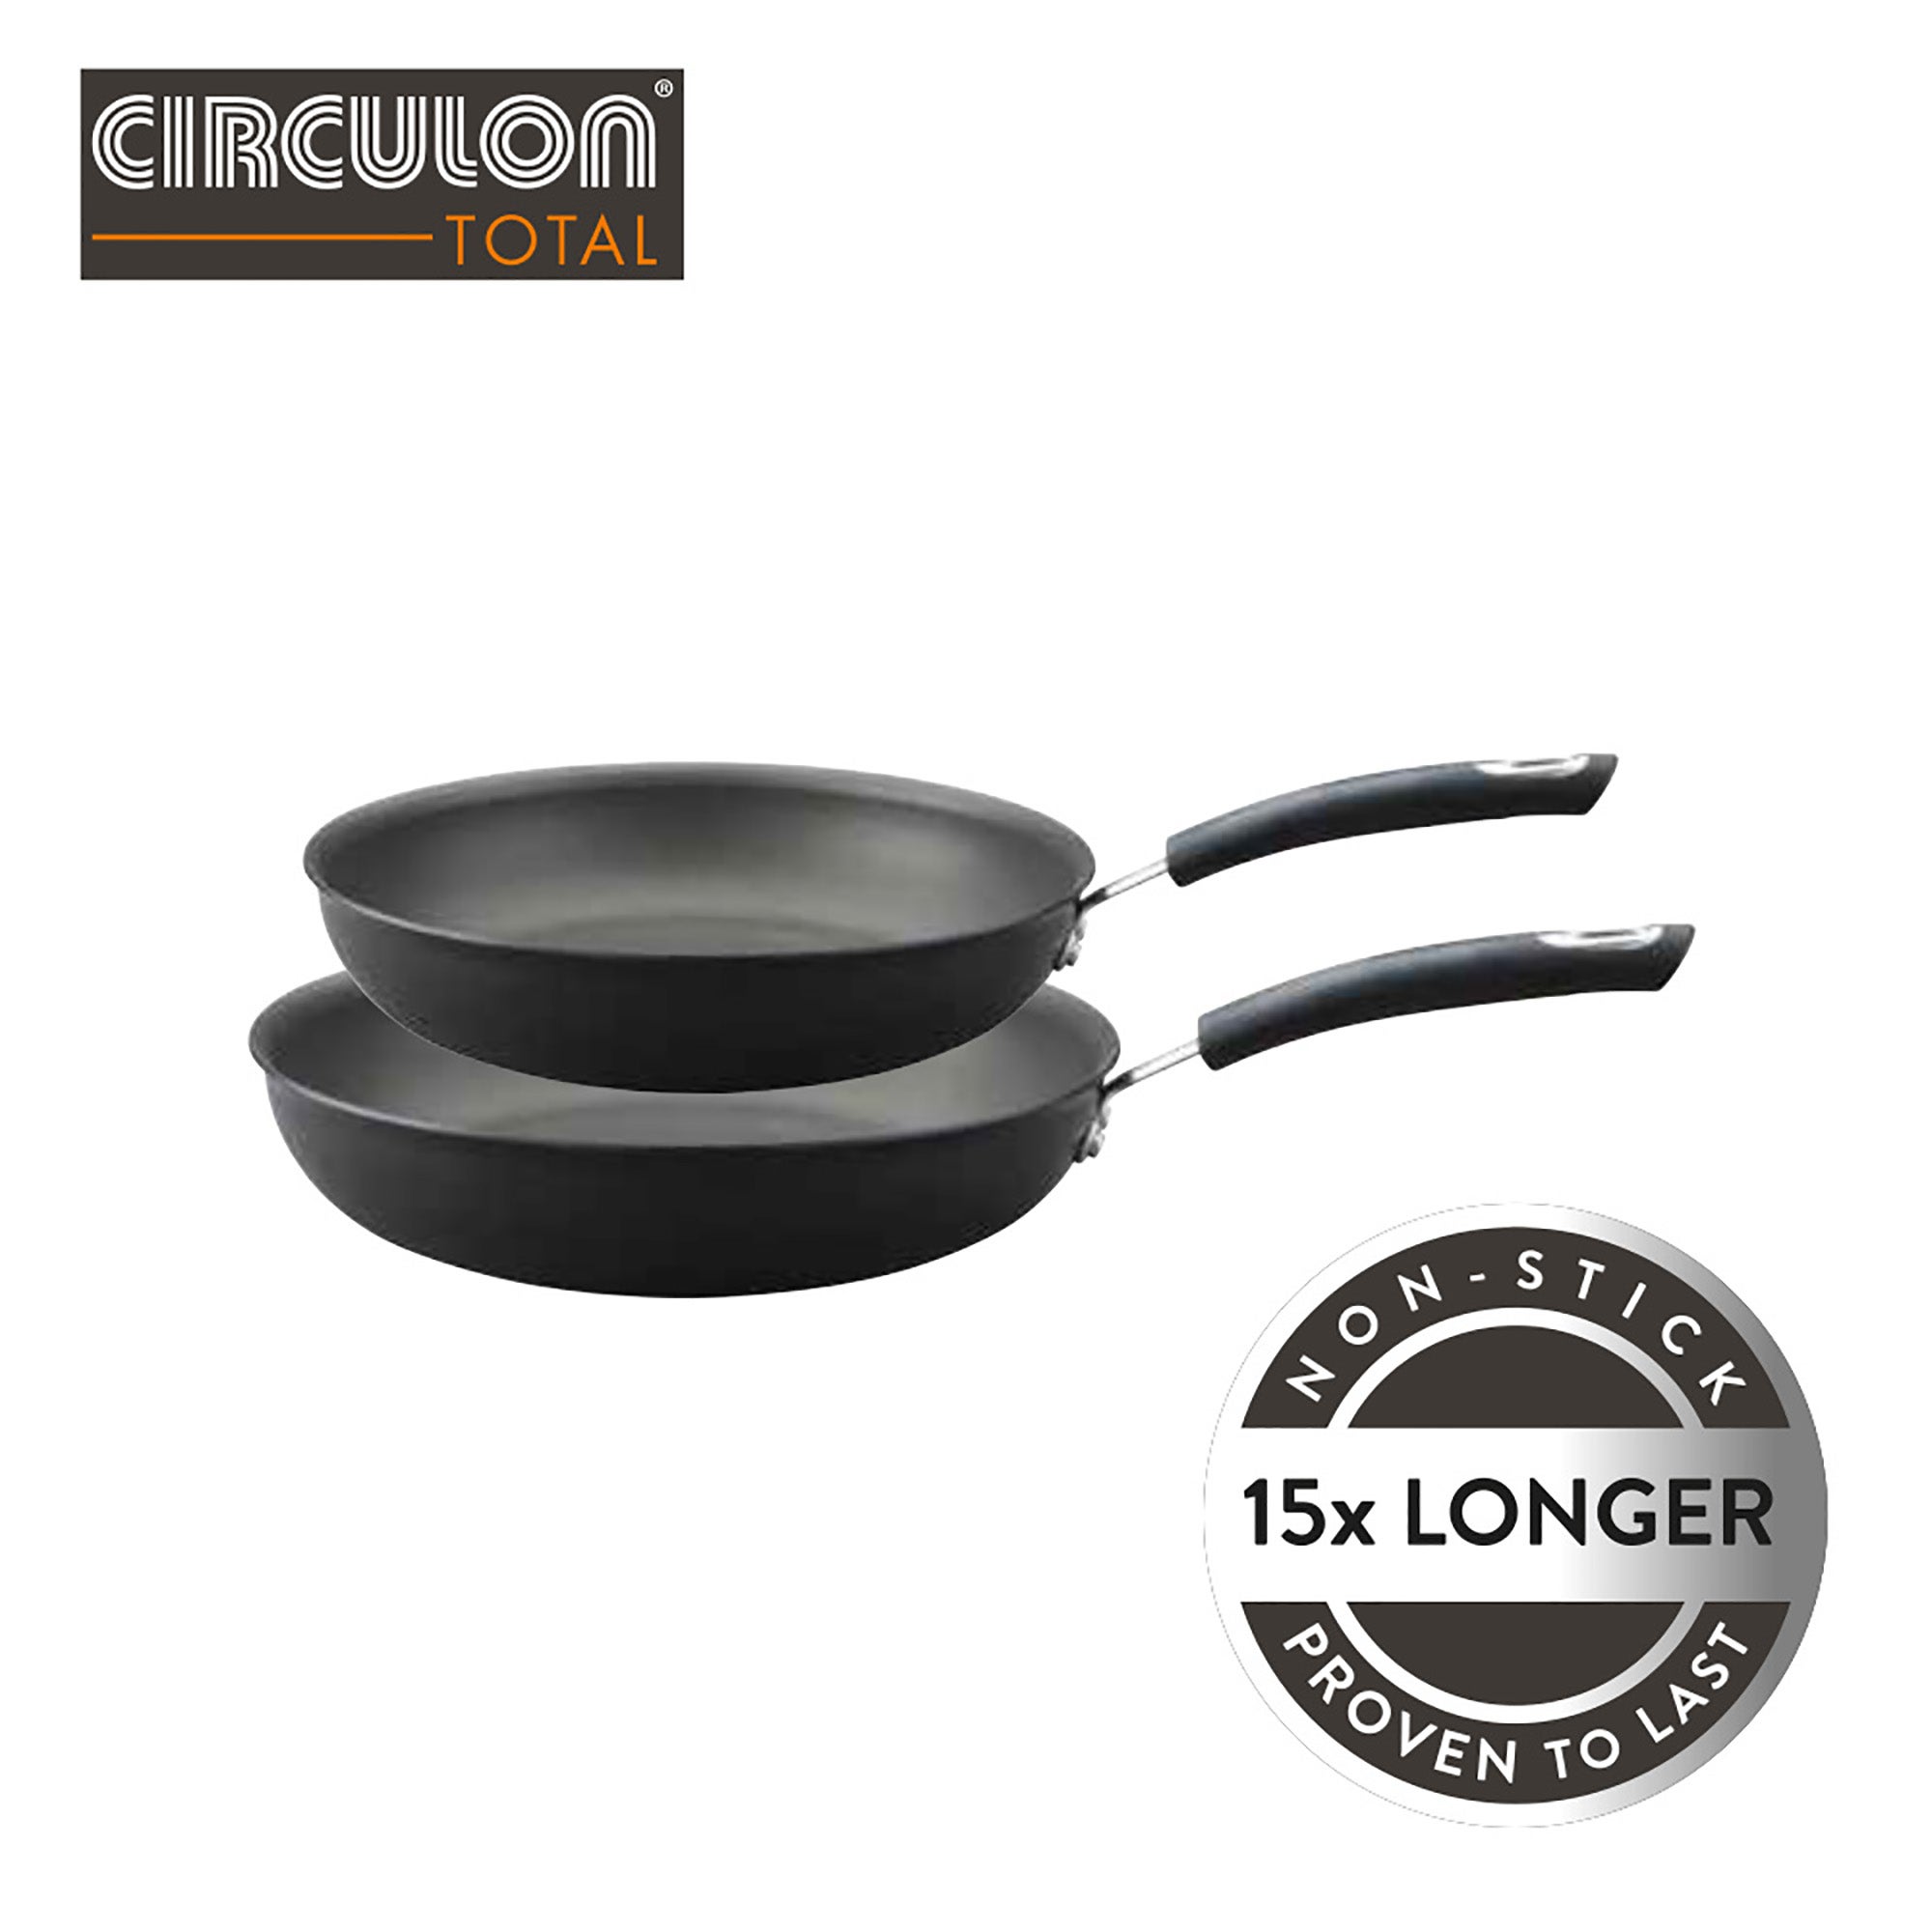 Circulon Elementum Hard-Anodized Nonstick Skillet Twin Pack - Oyster Gray,  2 pc - King Soopers